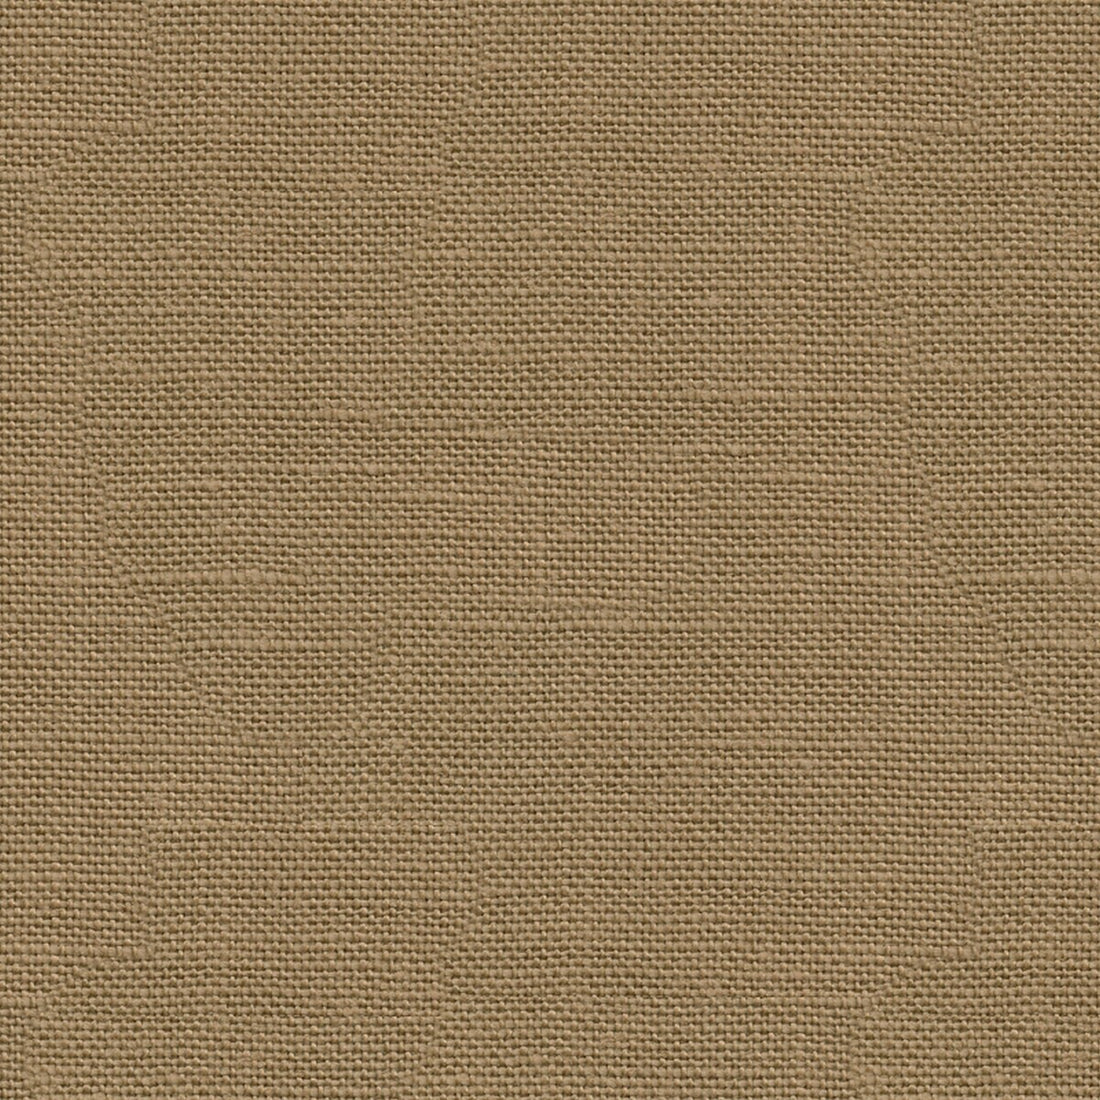 Weekend Linen fabric in camel color - pattern FD698.L102.0 - by Mulberry in the Crayford collection